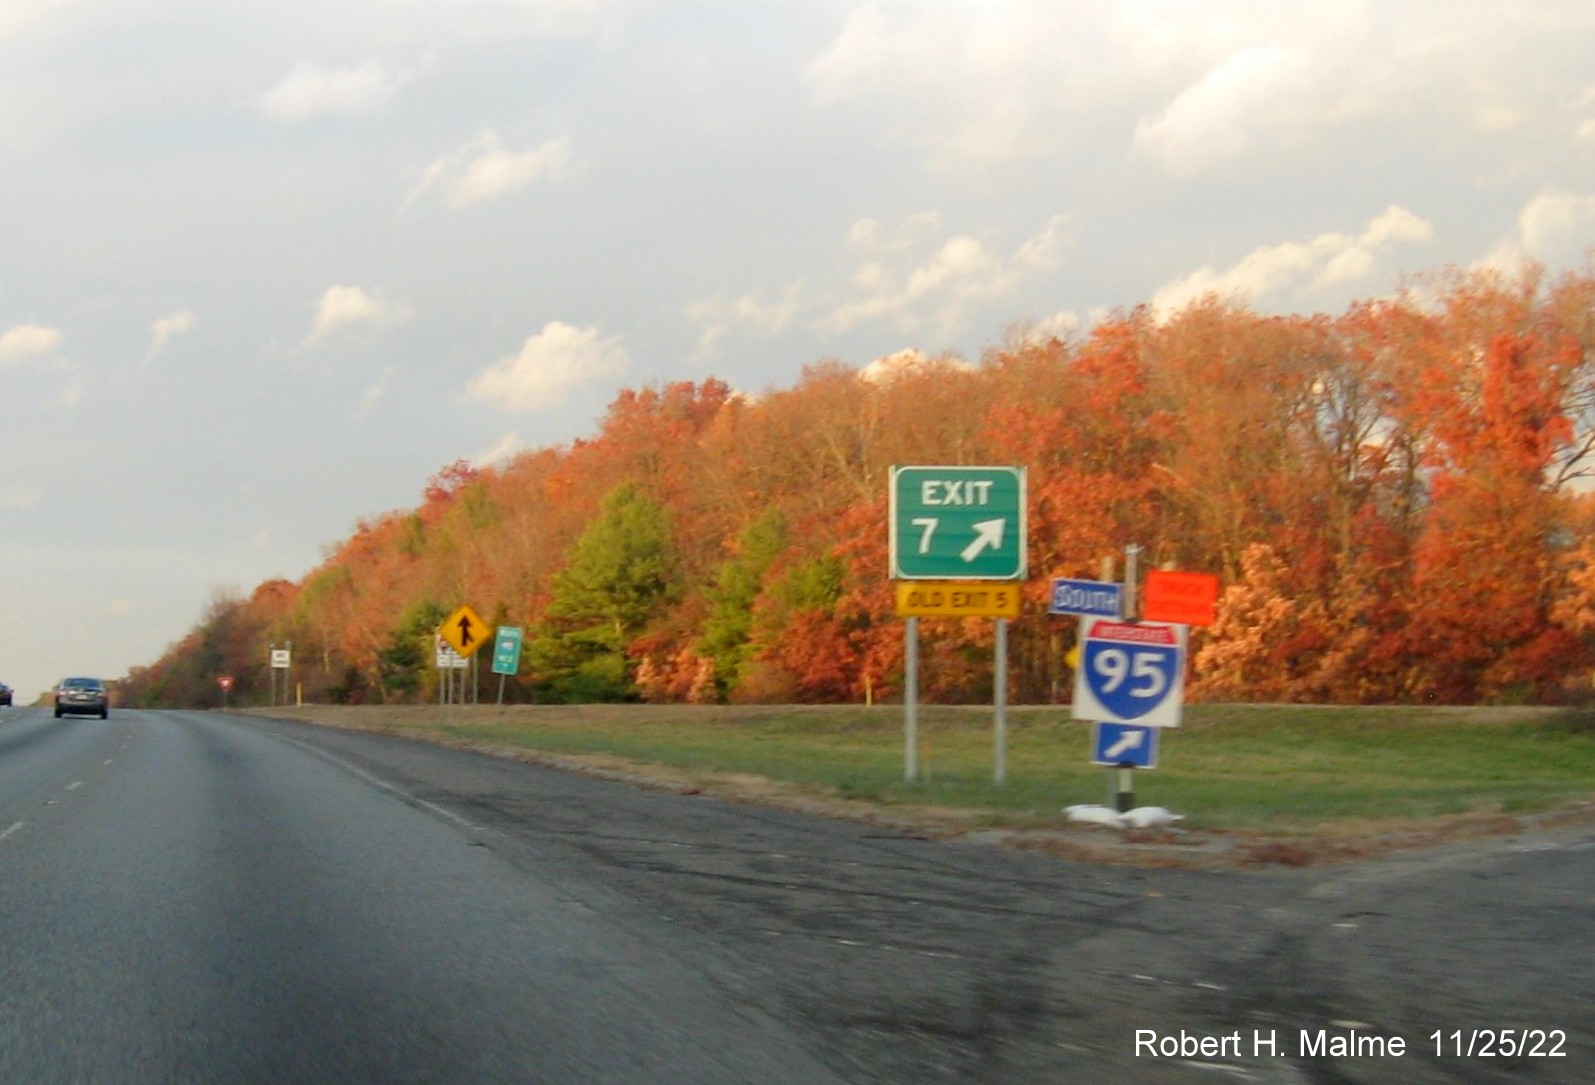 Image of new gore sign installed for the To MA 152 exit on I-95 North in North Attleborough, November 2022